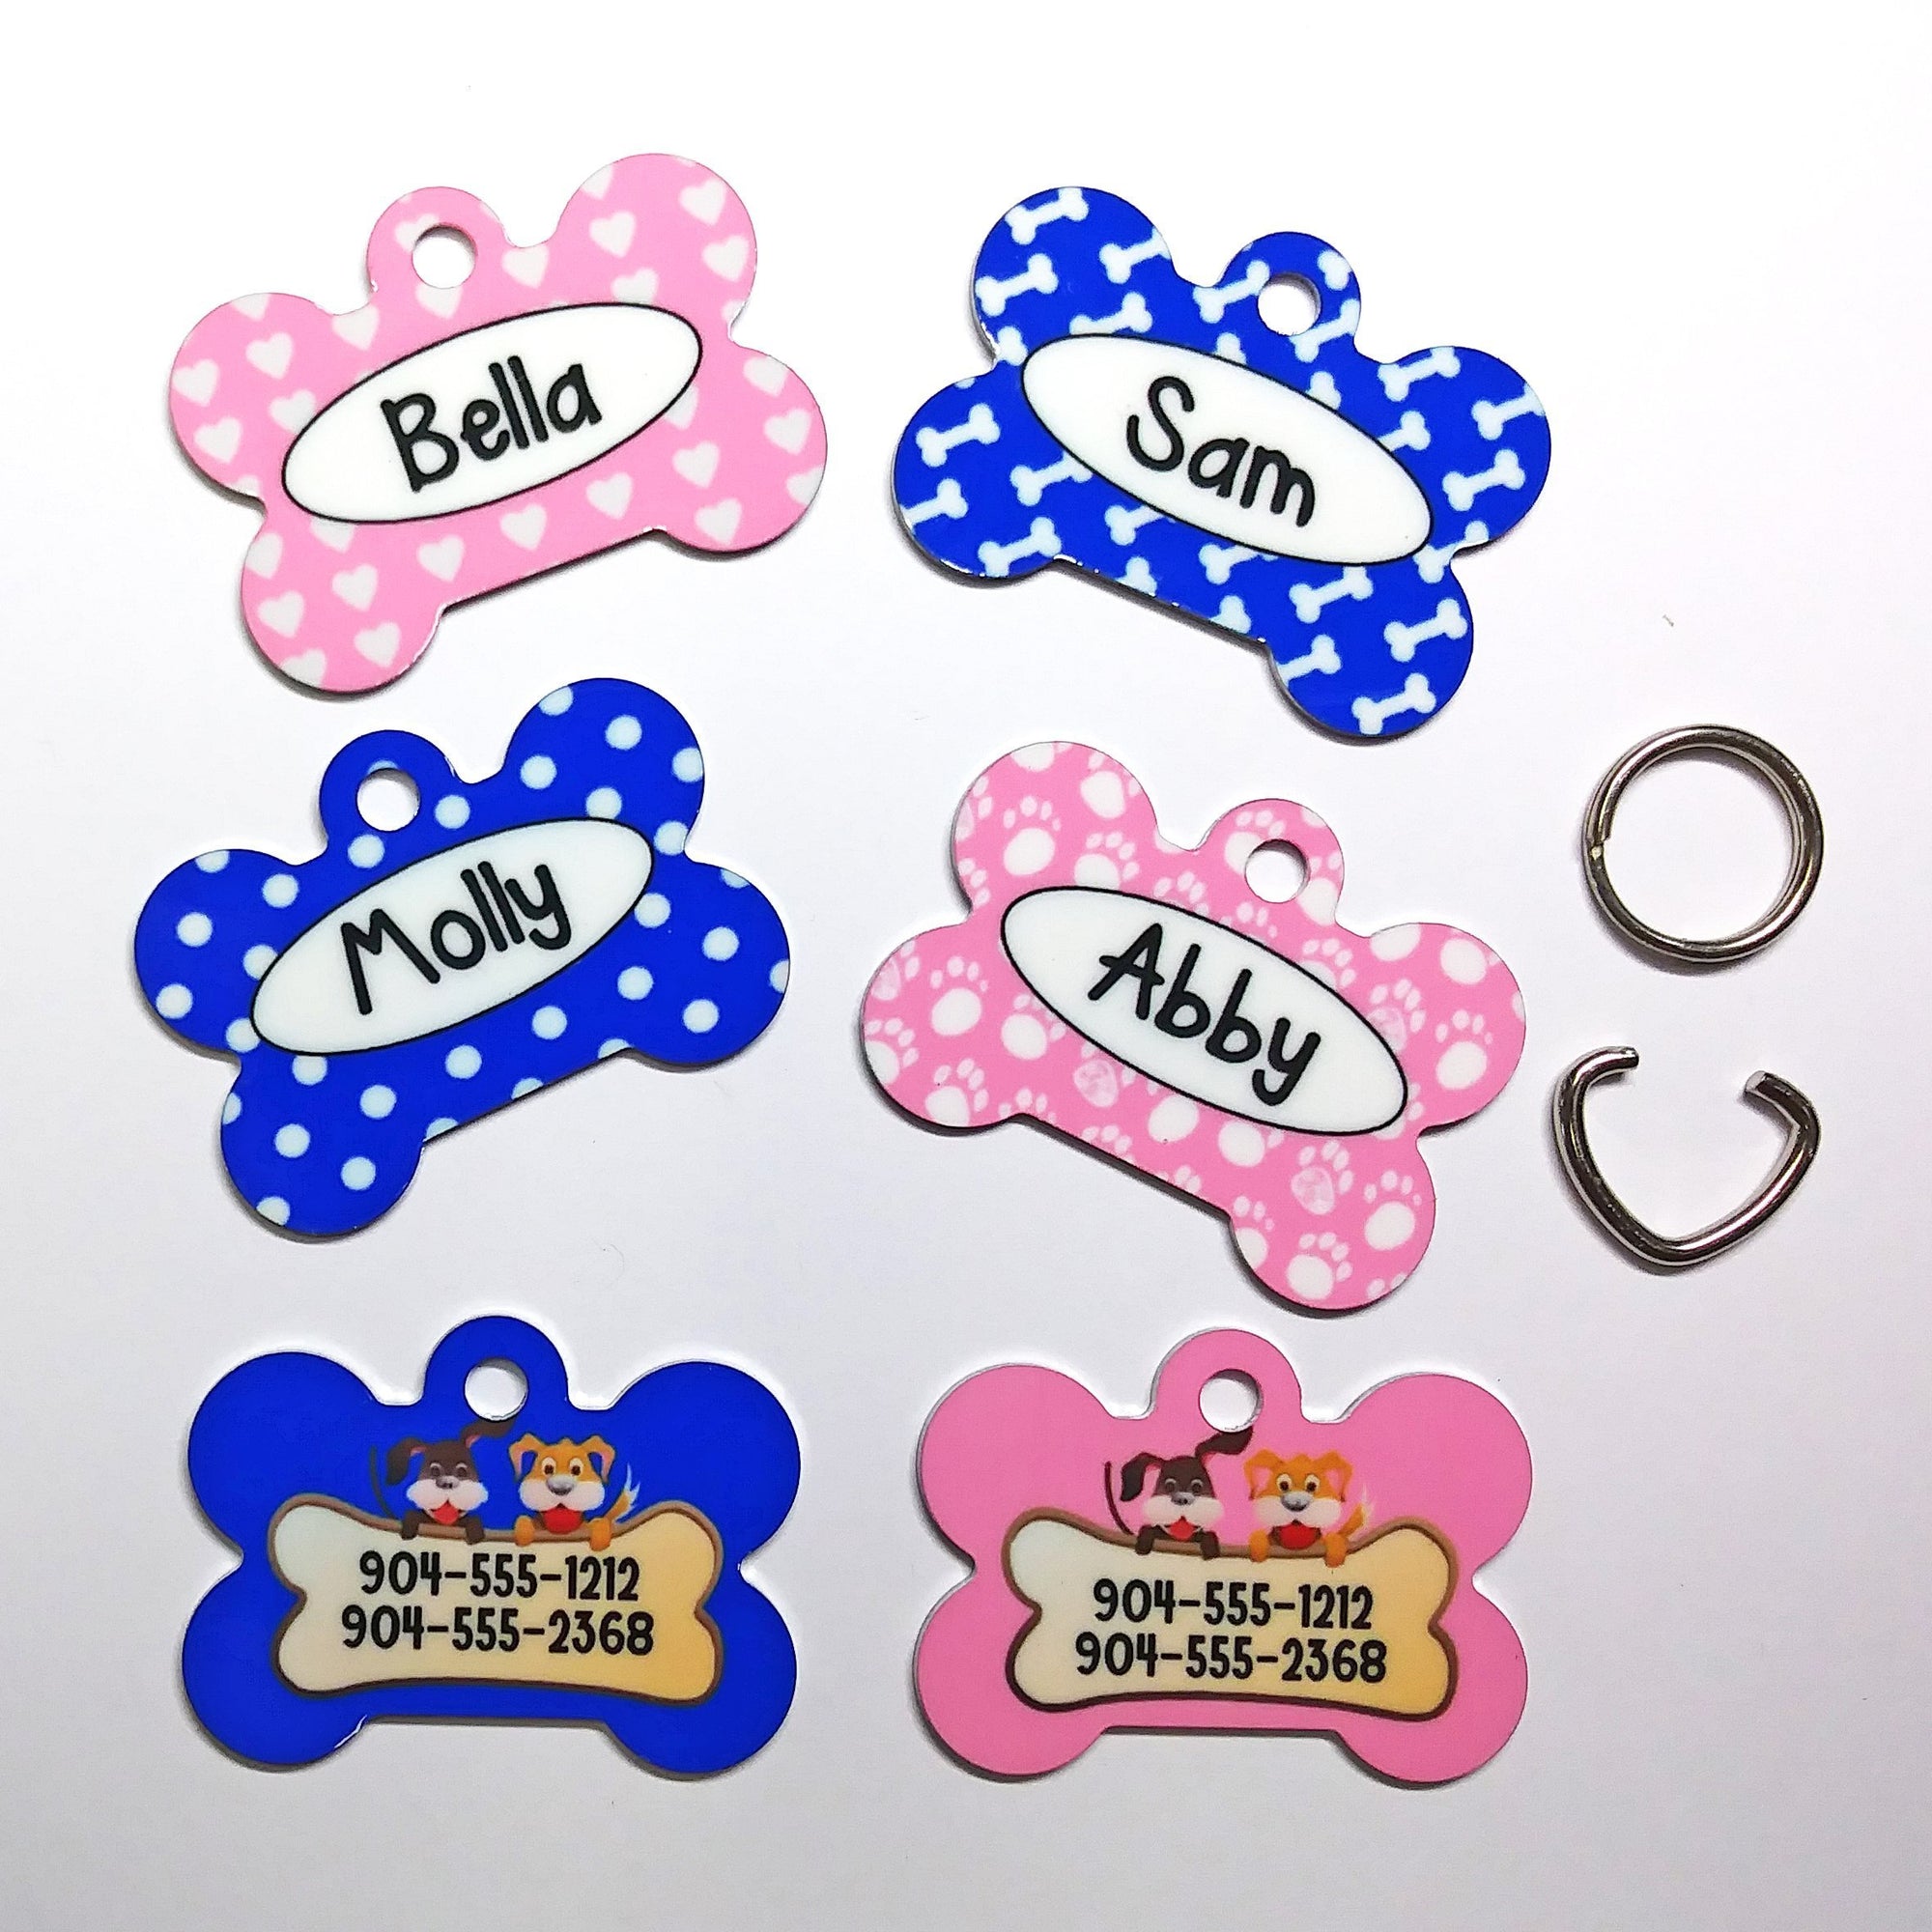 Personalized Metal Pets Tags with your Pets Name and your Phone Number - SophiaImpressions